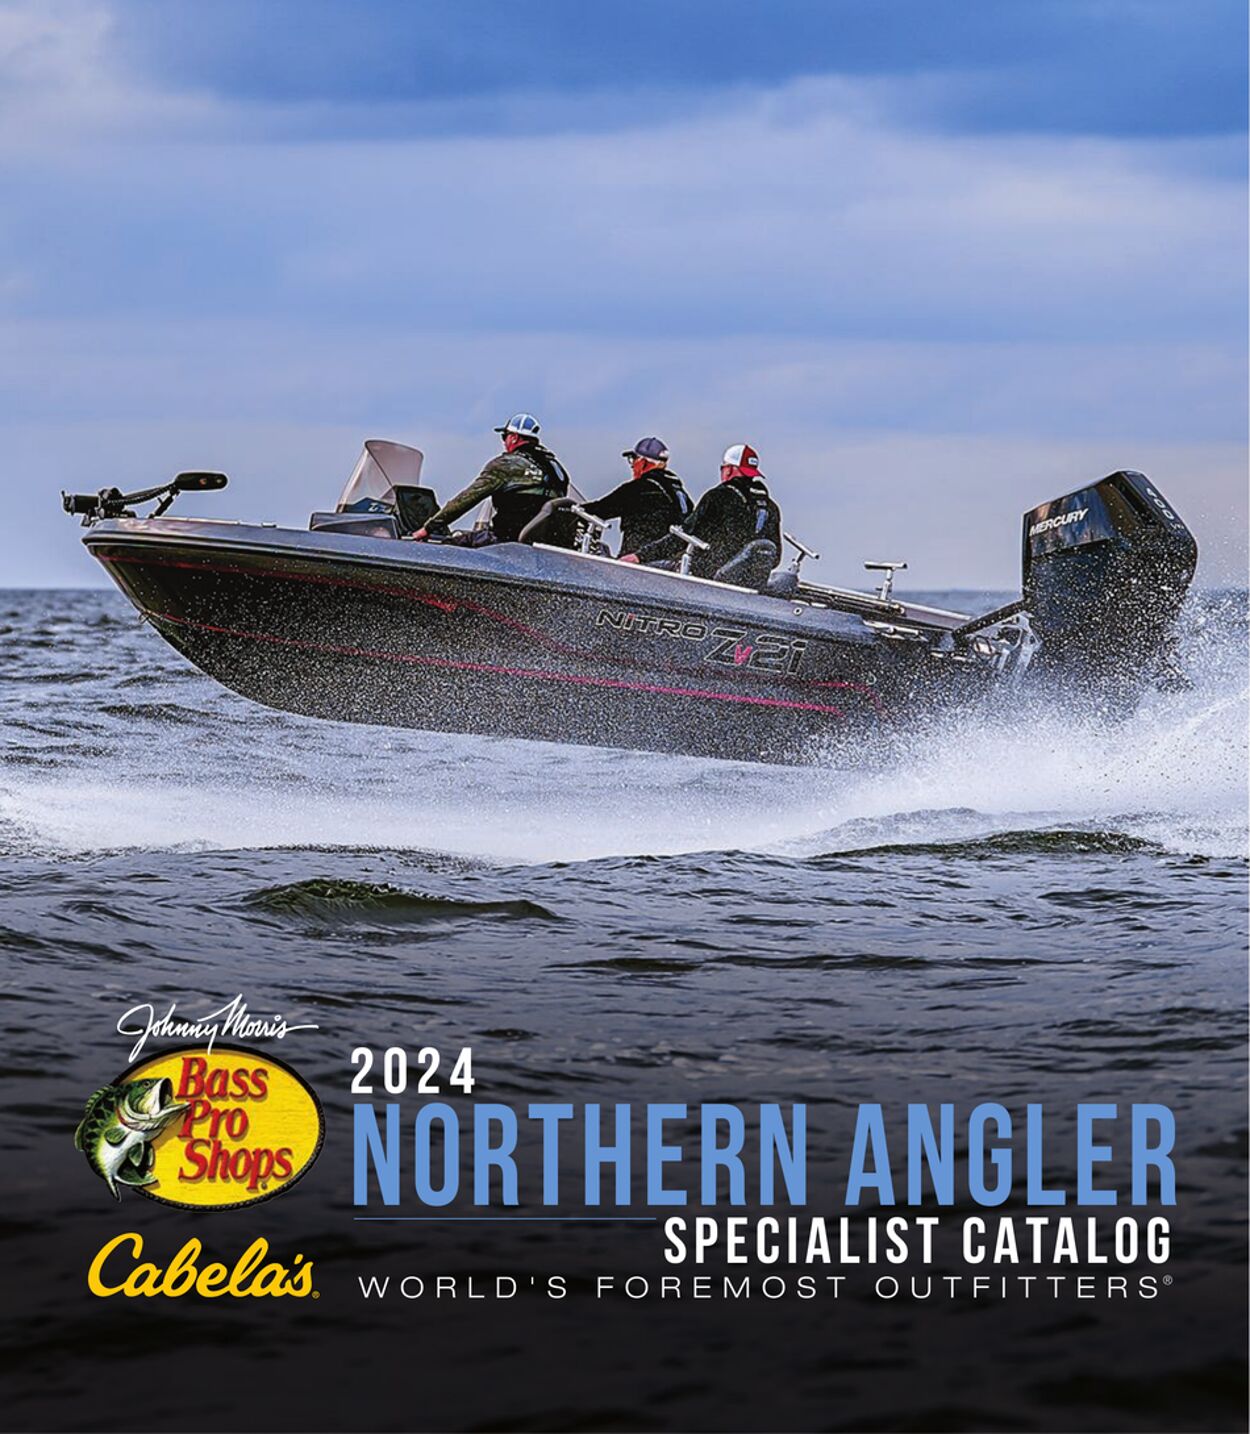 Cabela's weekly-ad